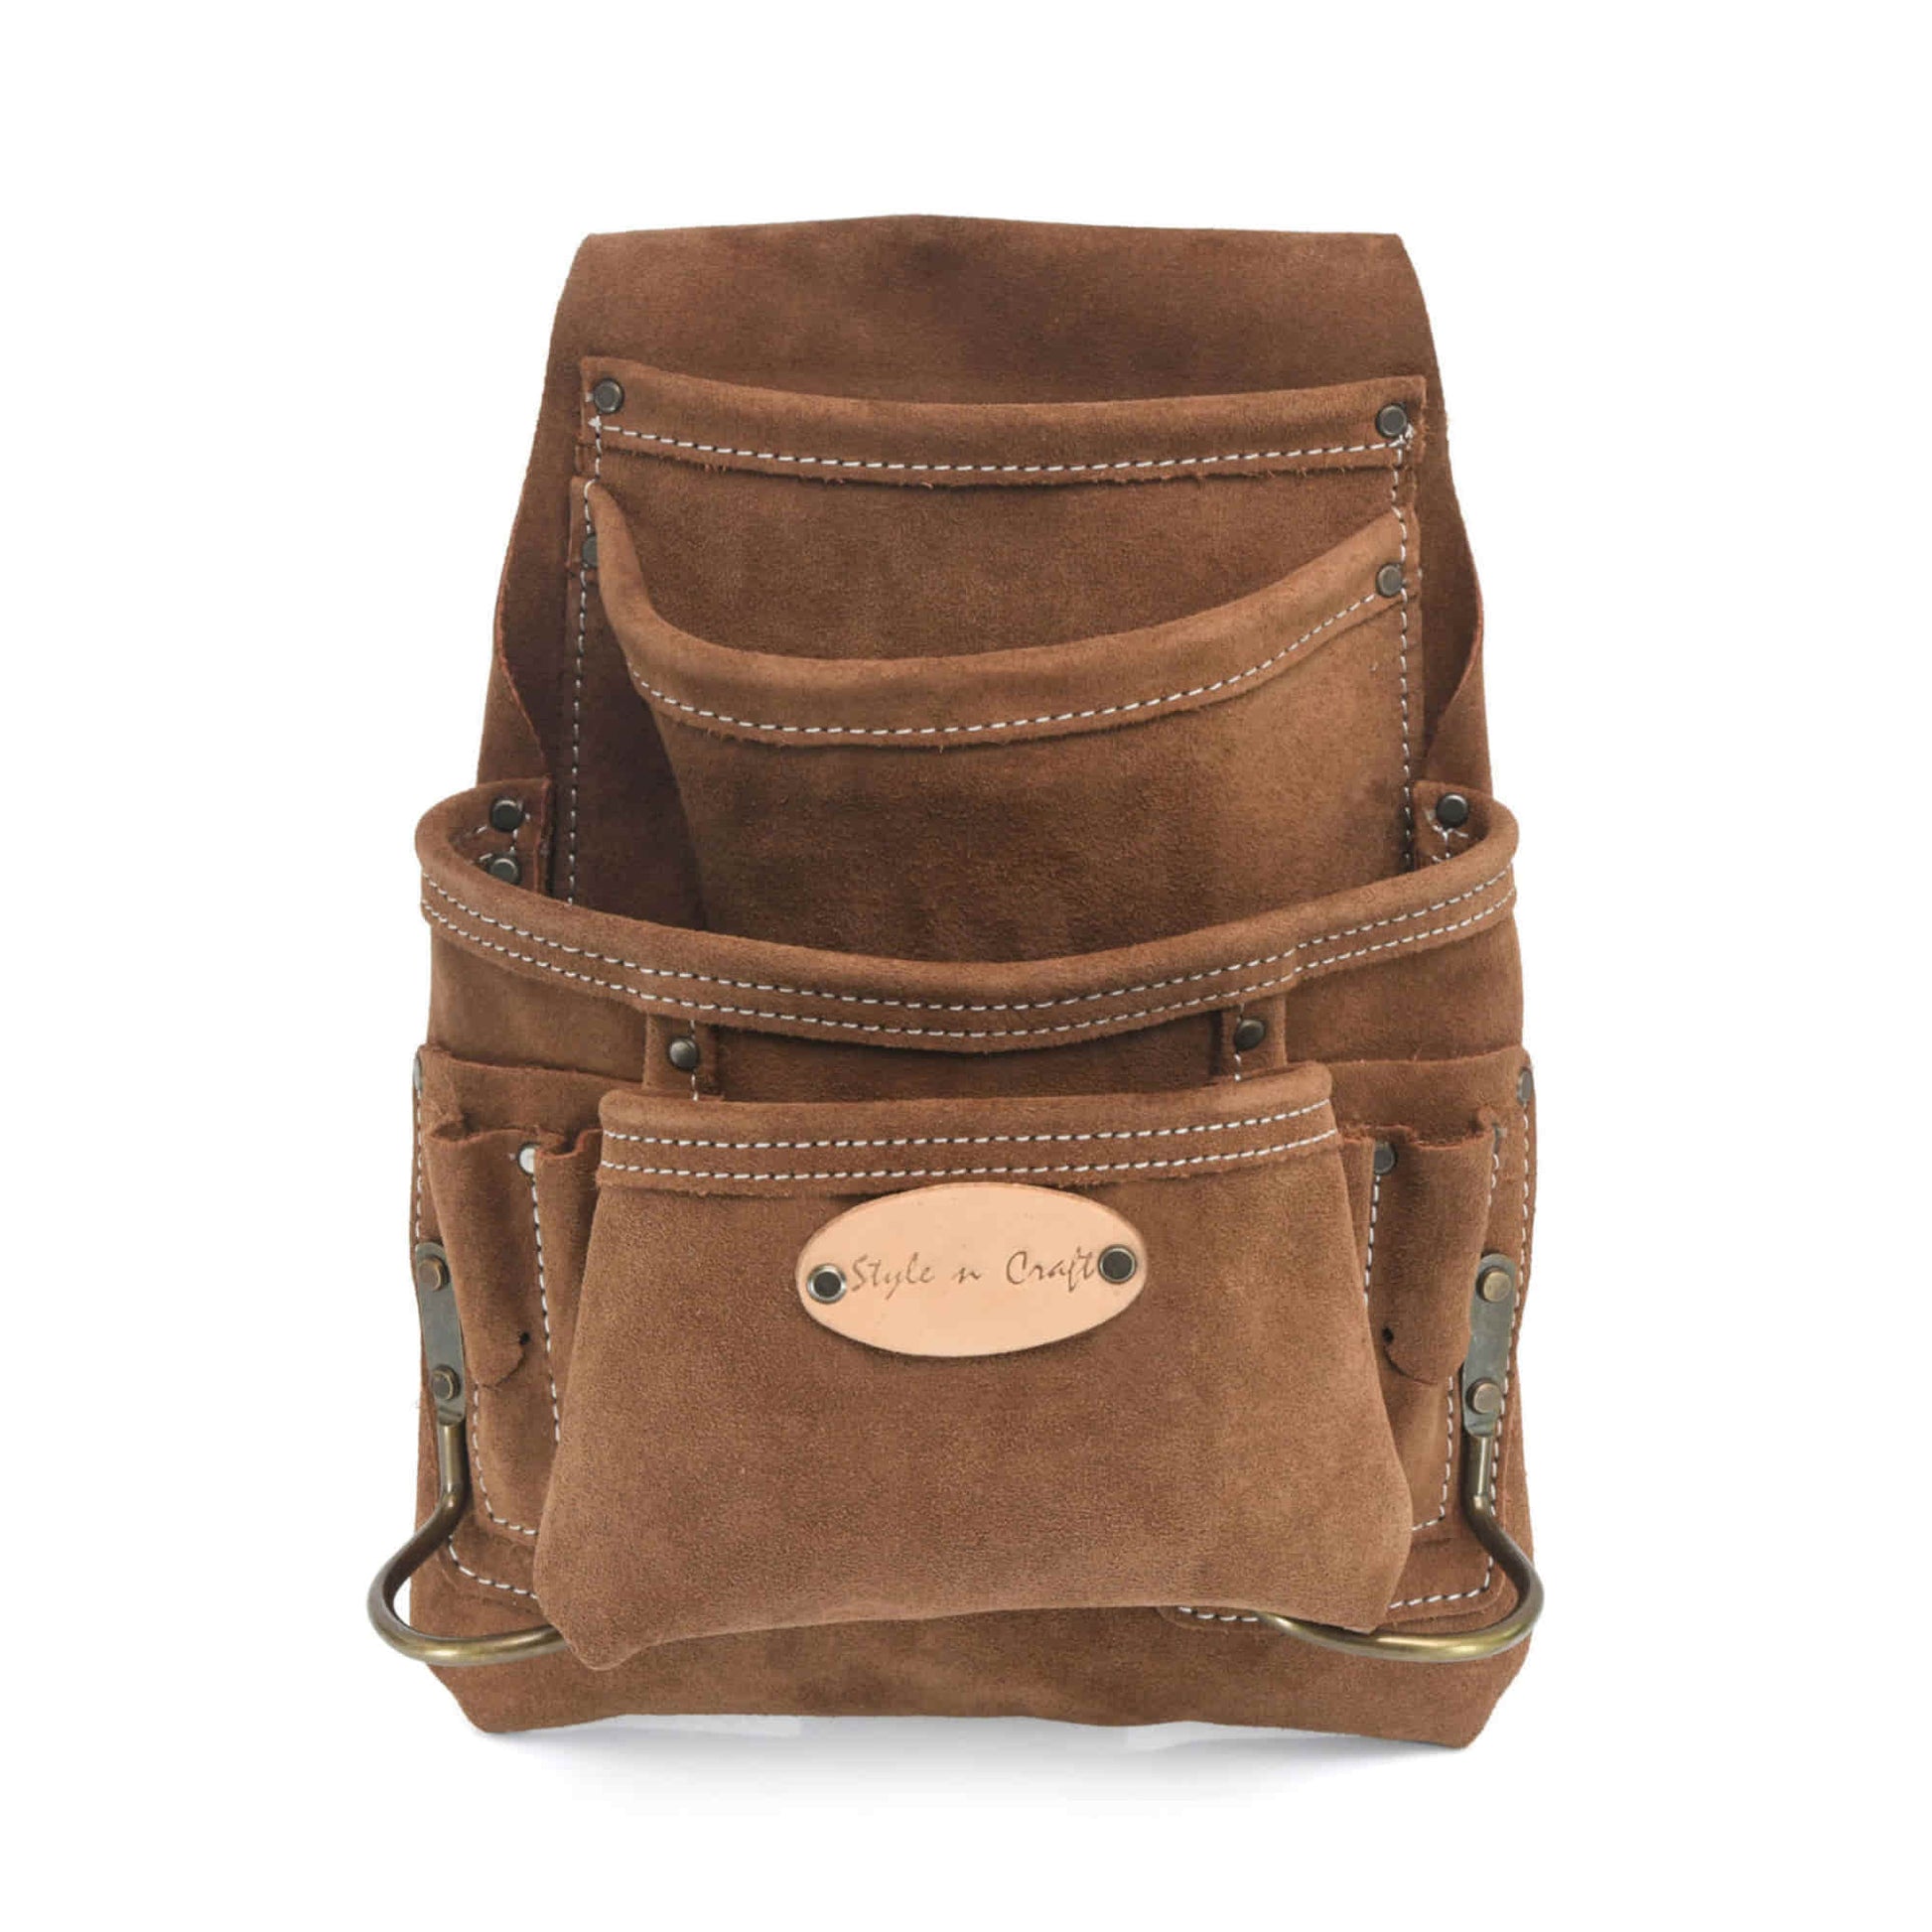 Style n Craft 88923 - 10 Pocket Carpenter's Nail and Tool Pouch in Heavy Duty Suede Leather in Dark Tan Color with Antique Finish Hardware - Front View showing the main poich, reversed front pocket, the smaller pockets above the front pocket, pencil holder pockets & 2 metal hammer holders